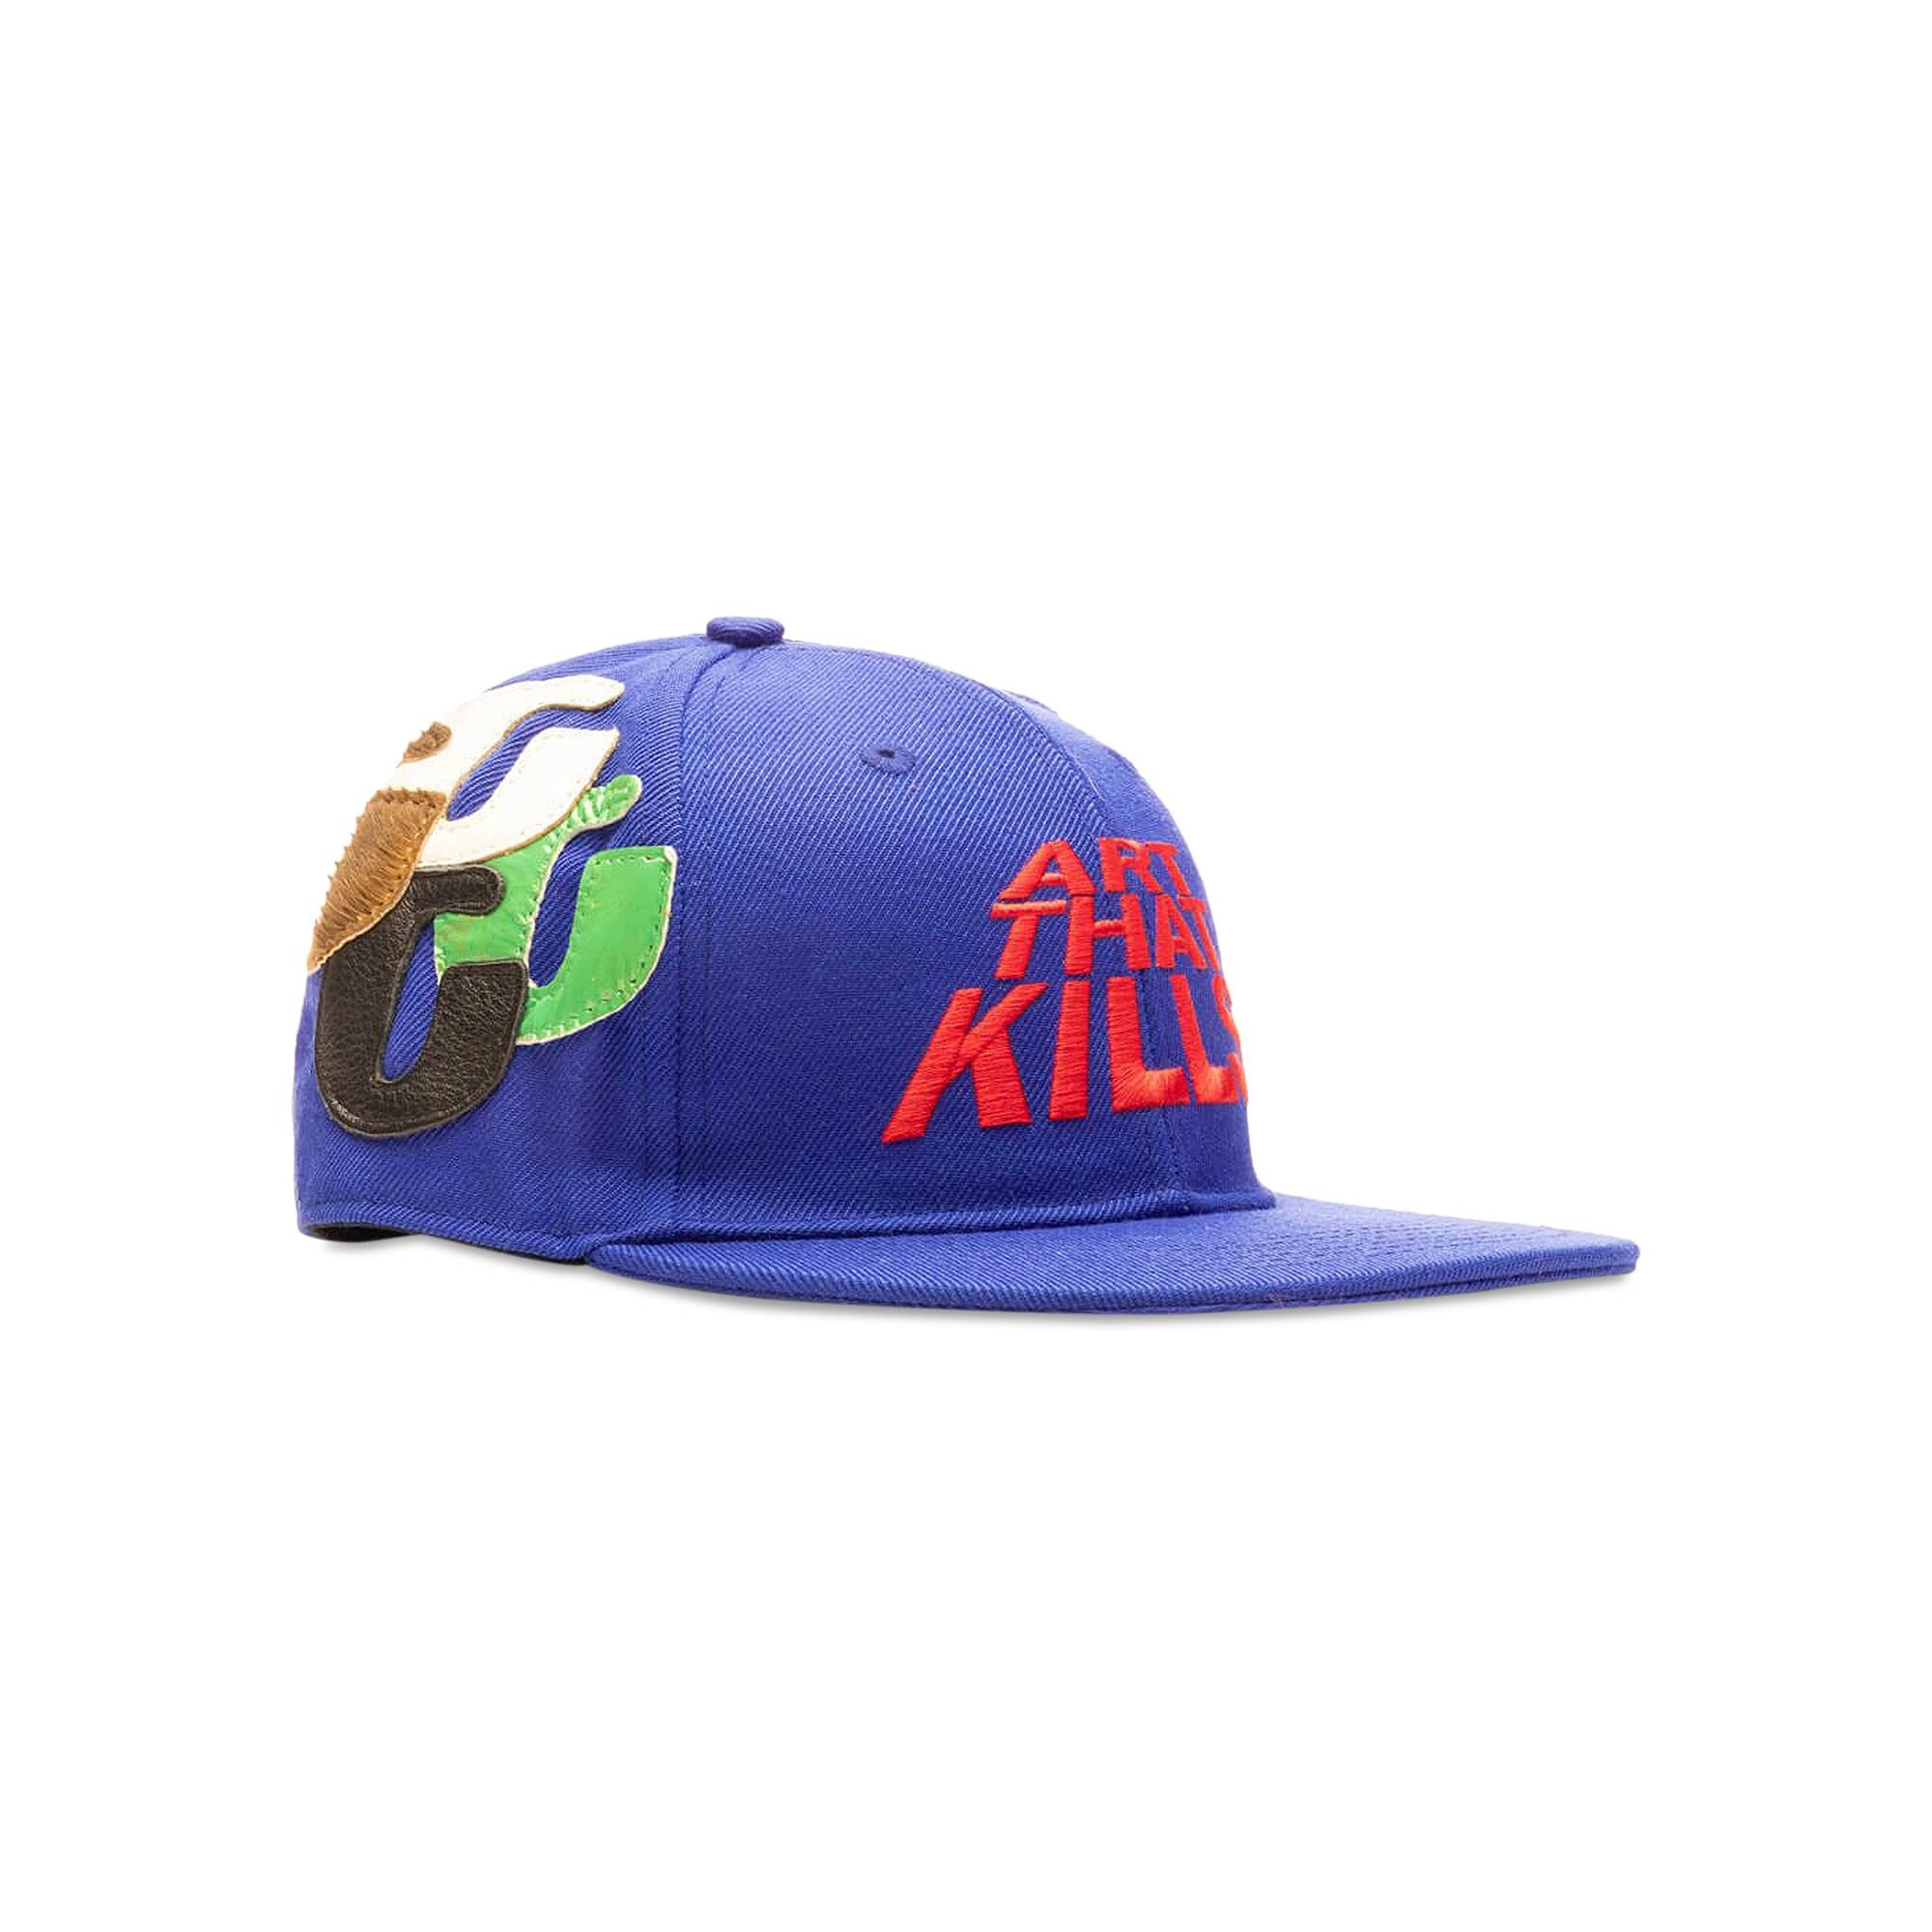 Gallery Dept. ATK G Patch Fitted Cap 'Blue' - 3